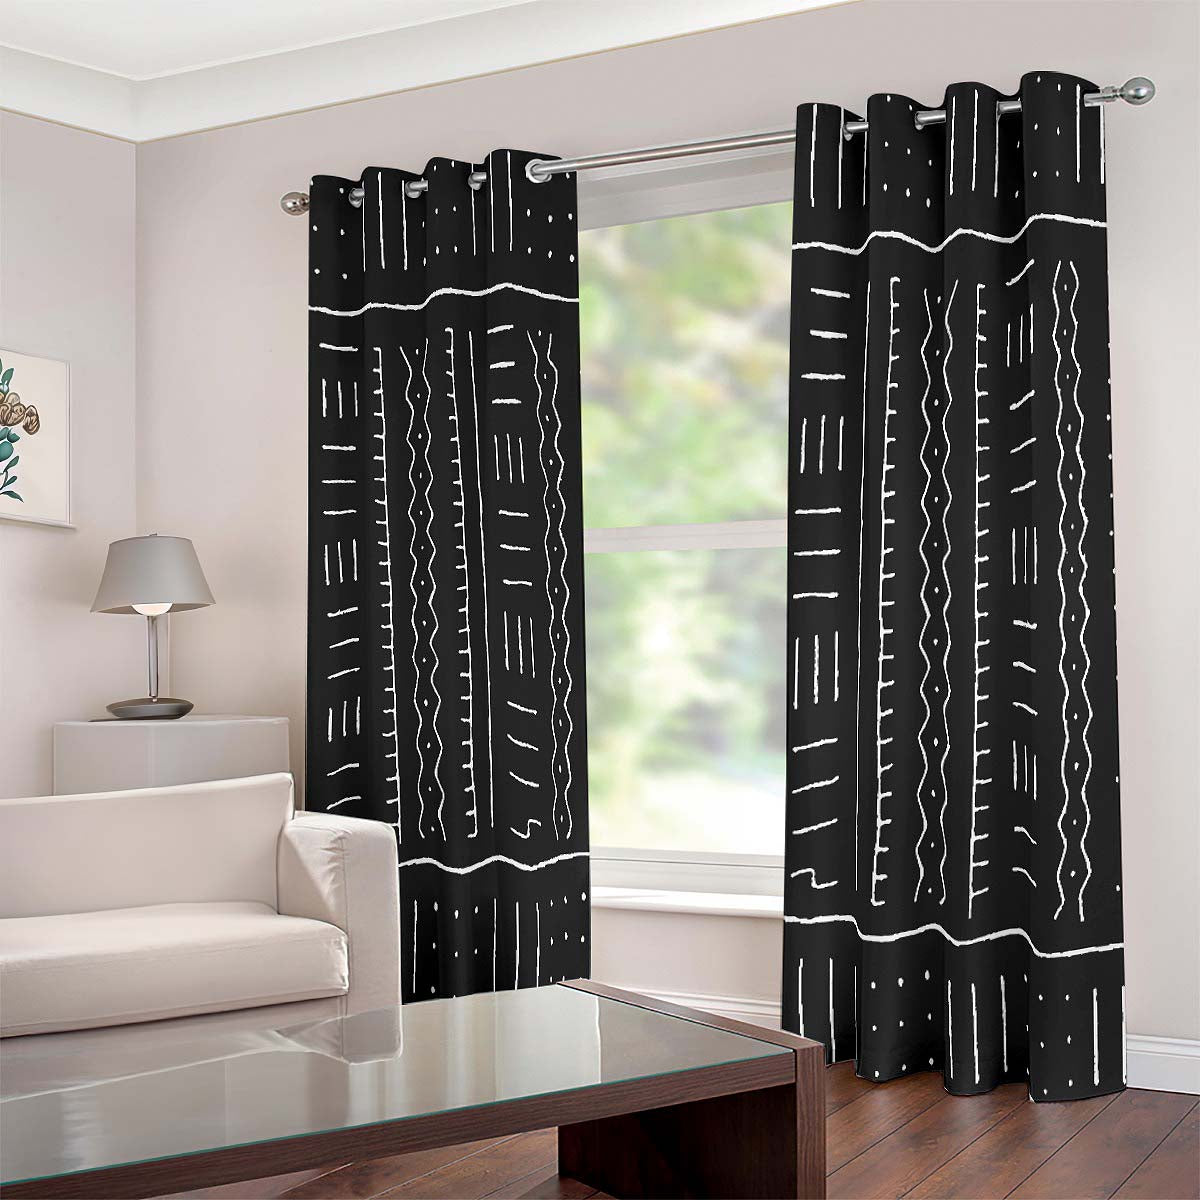 African Grommet Tribal Curtain - Black & White 2-Piece